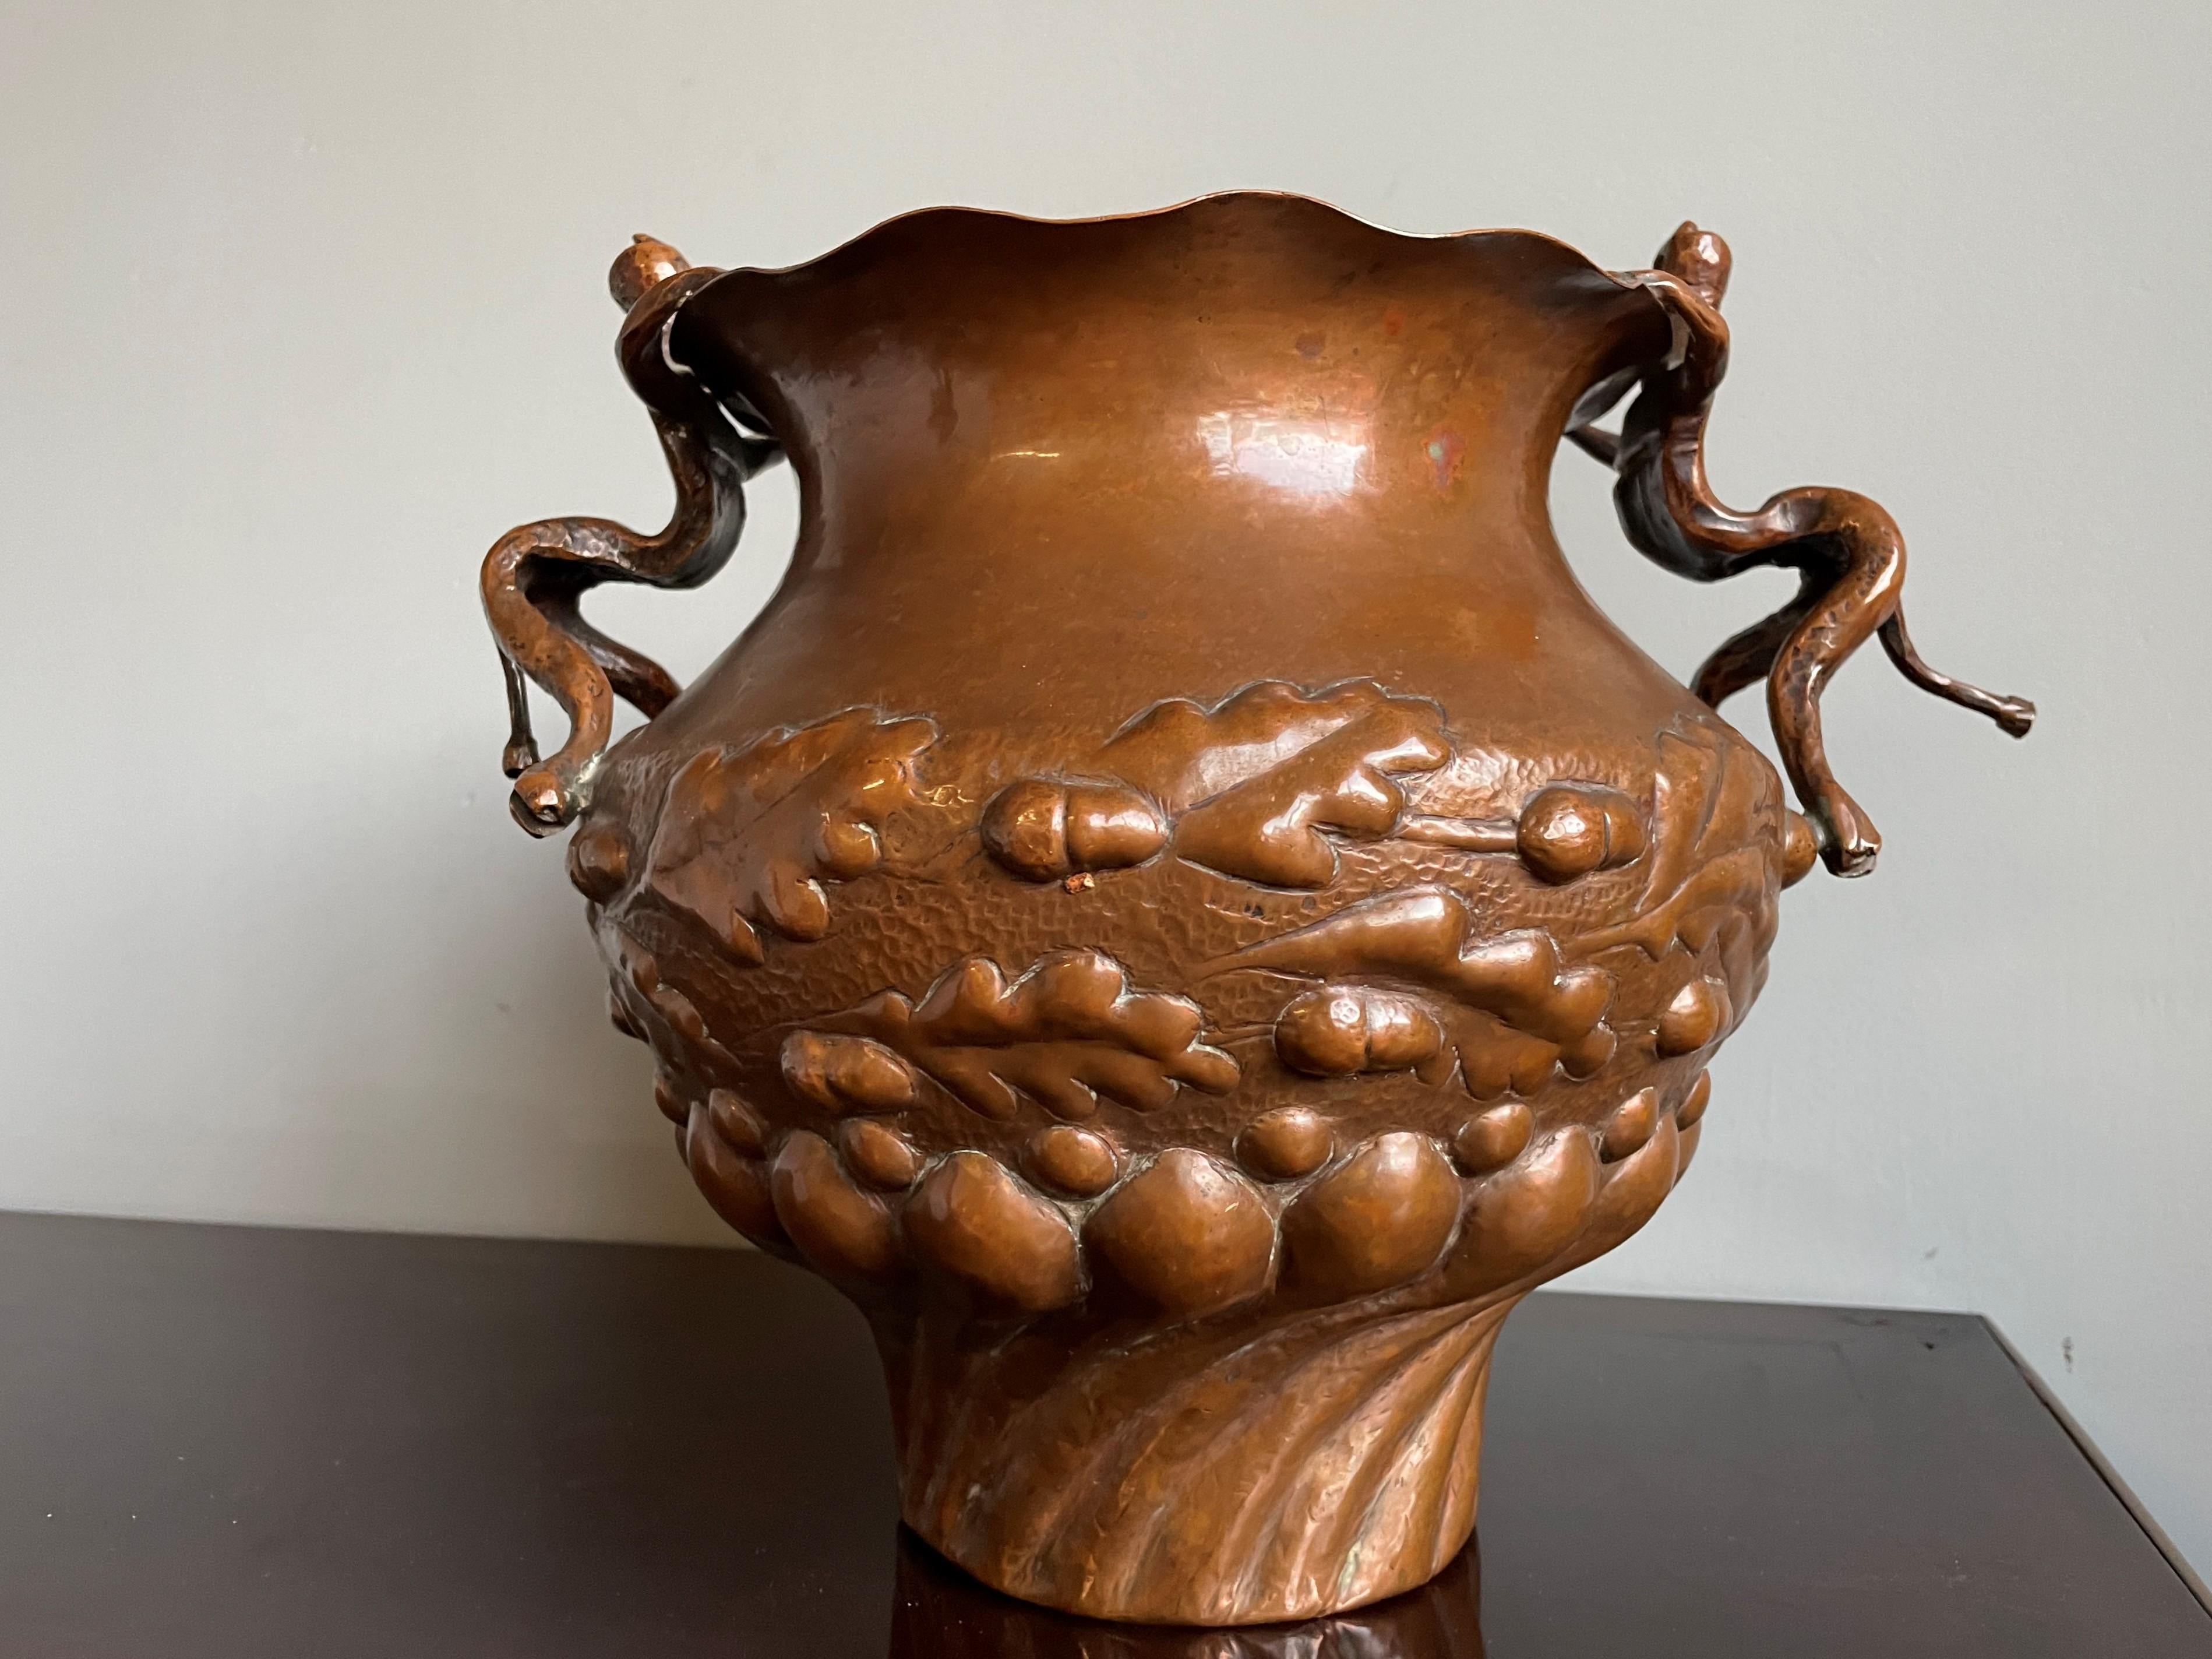 Unique Mid 1800s Embossed Copper Planter / Vase with Satyr Sculptures as Handles For Sale 6